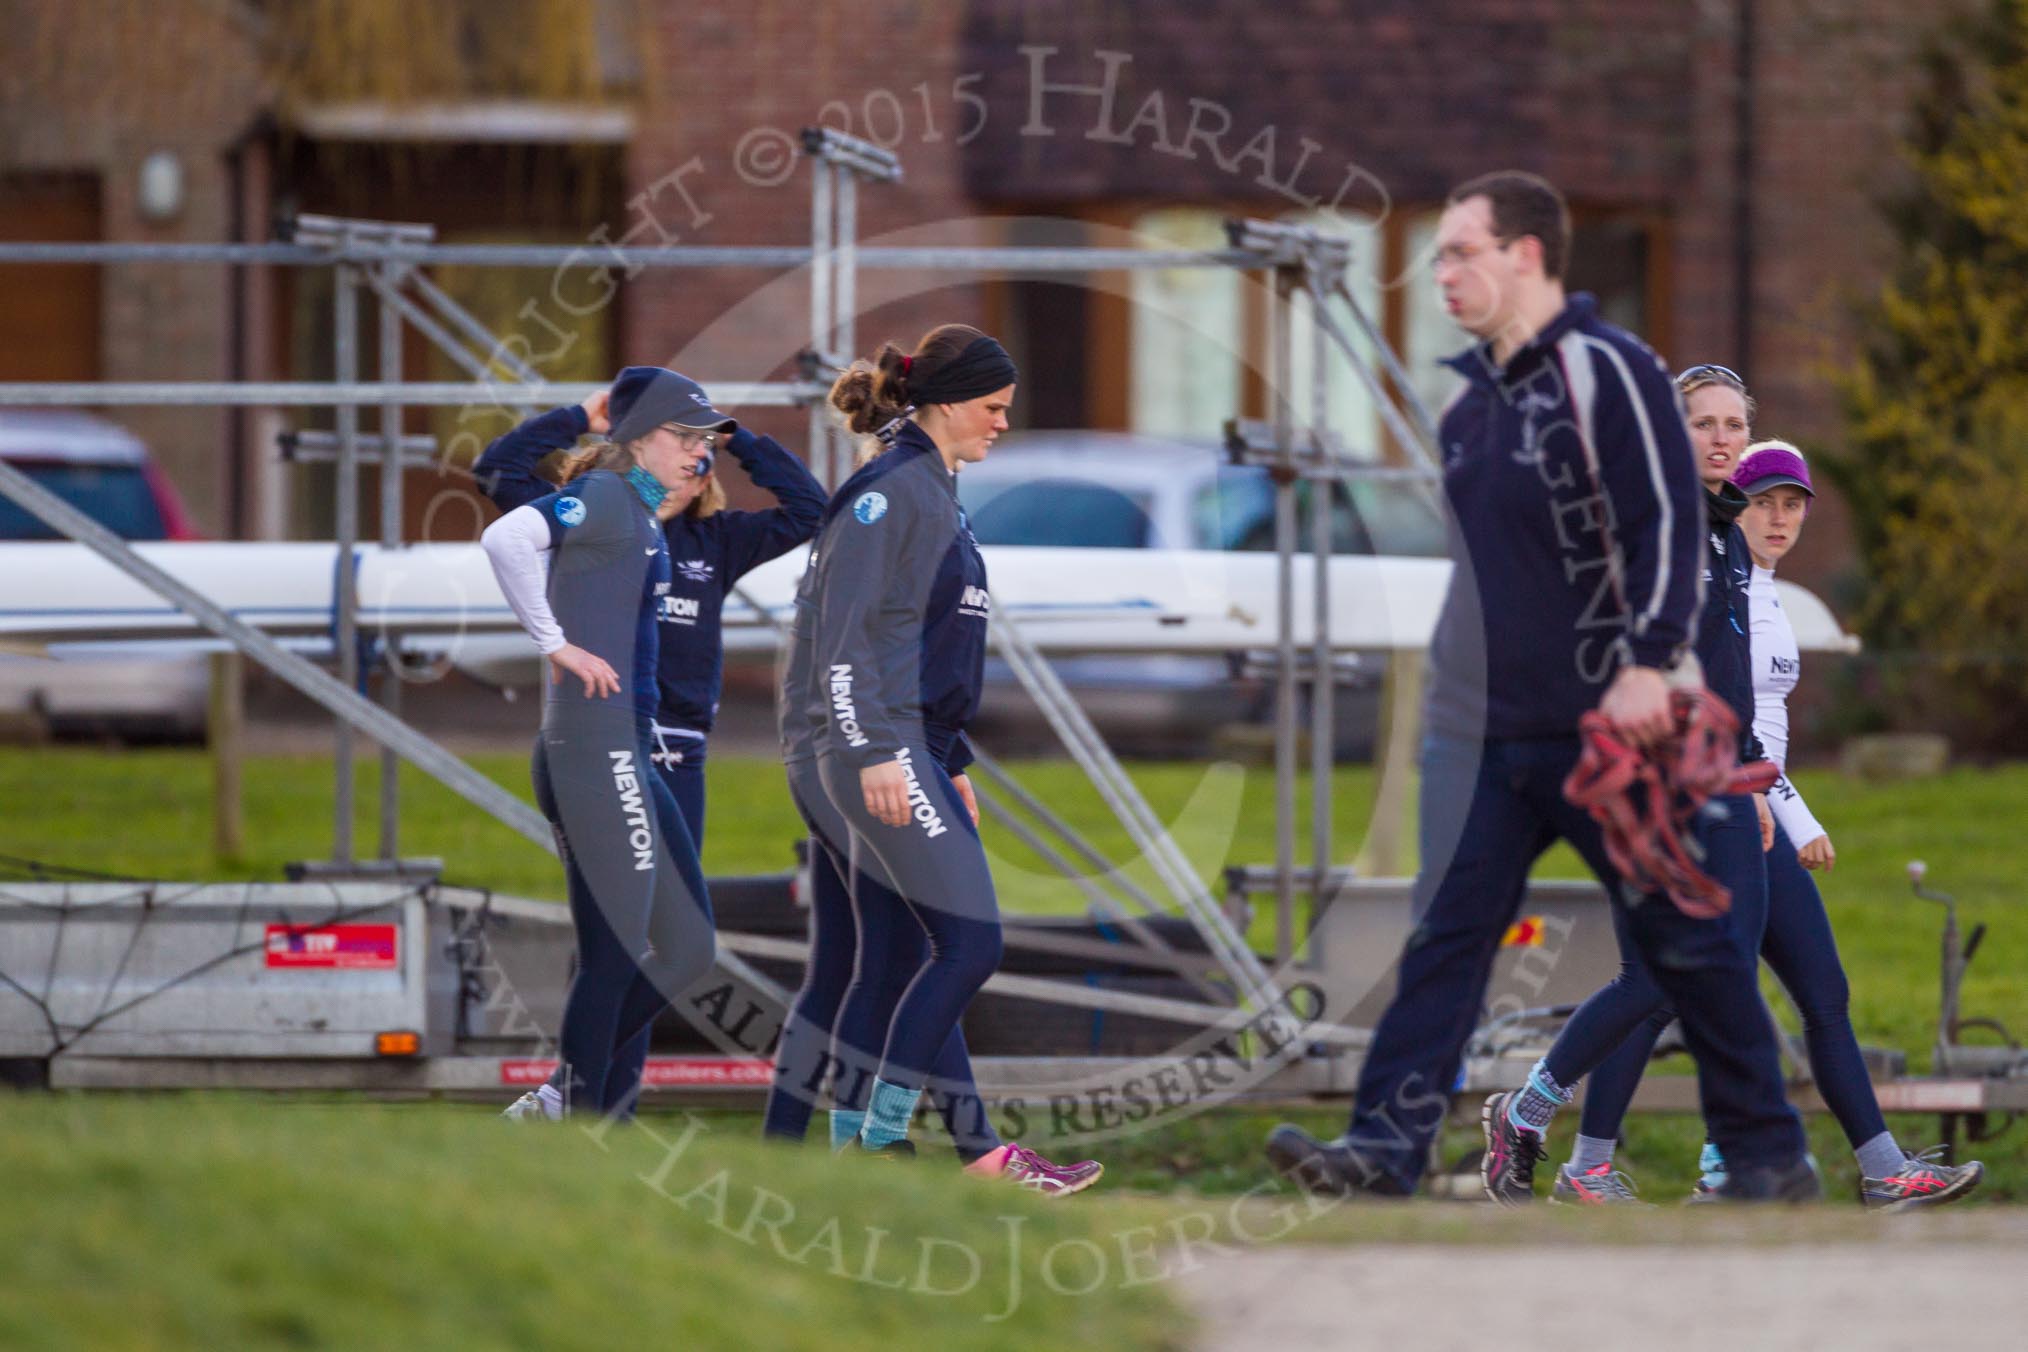 The Boat Race season 2015: OUWBC training Wallingford.

Wallingford,

United Kingdom,
on 04 March 2015 at 16:17, image #194